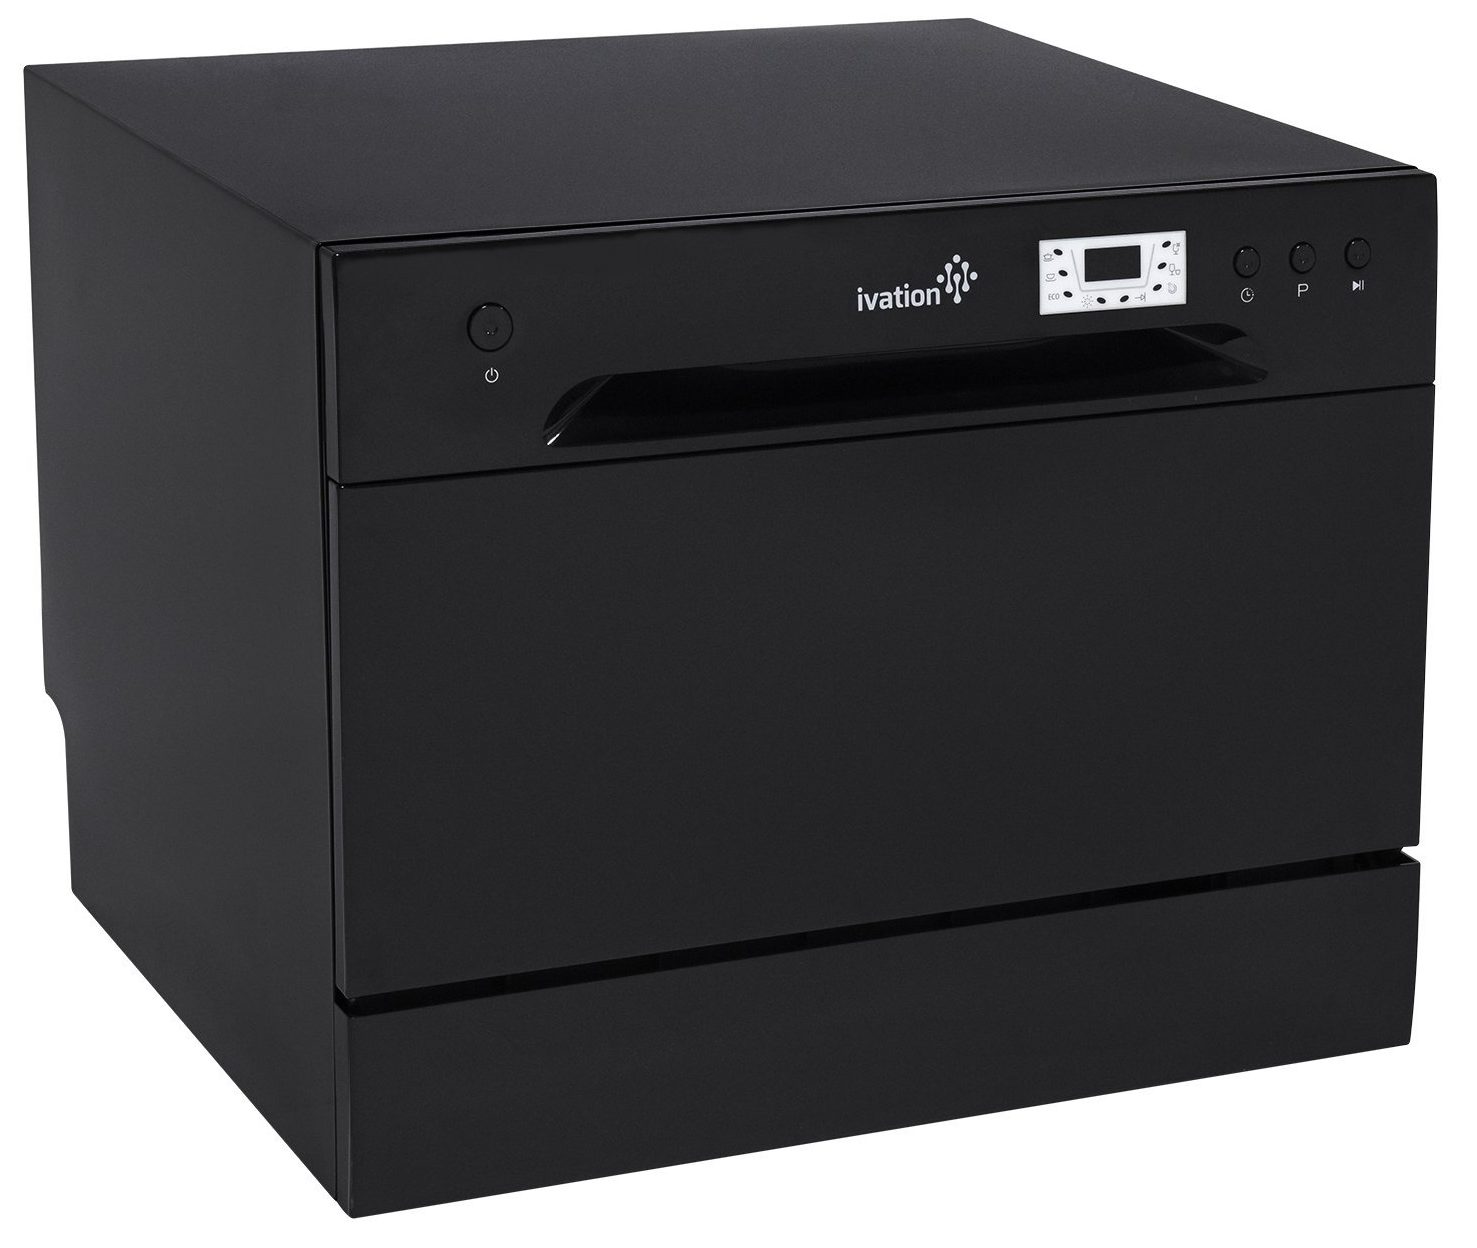 Best Countertop Dishwasher 2018: Invation Portable in Black